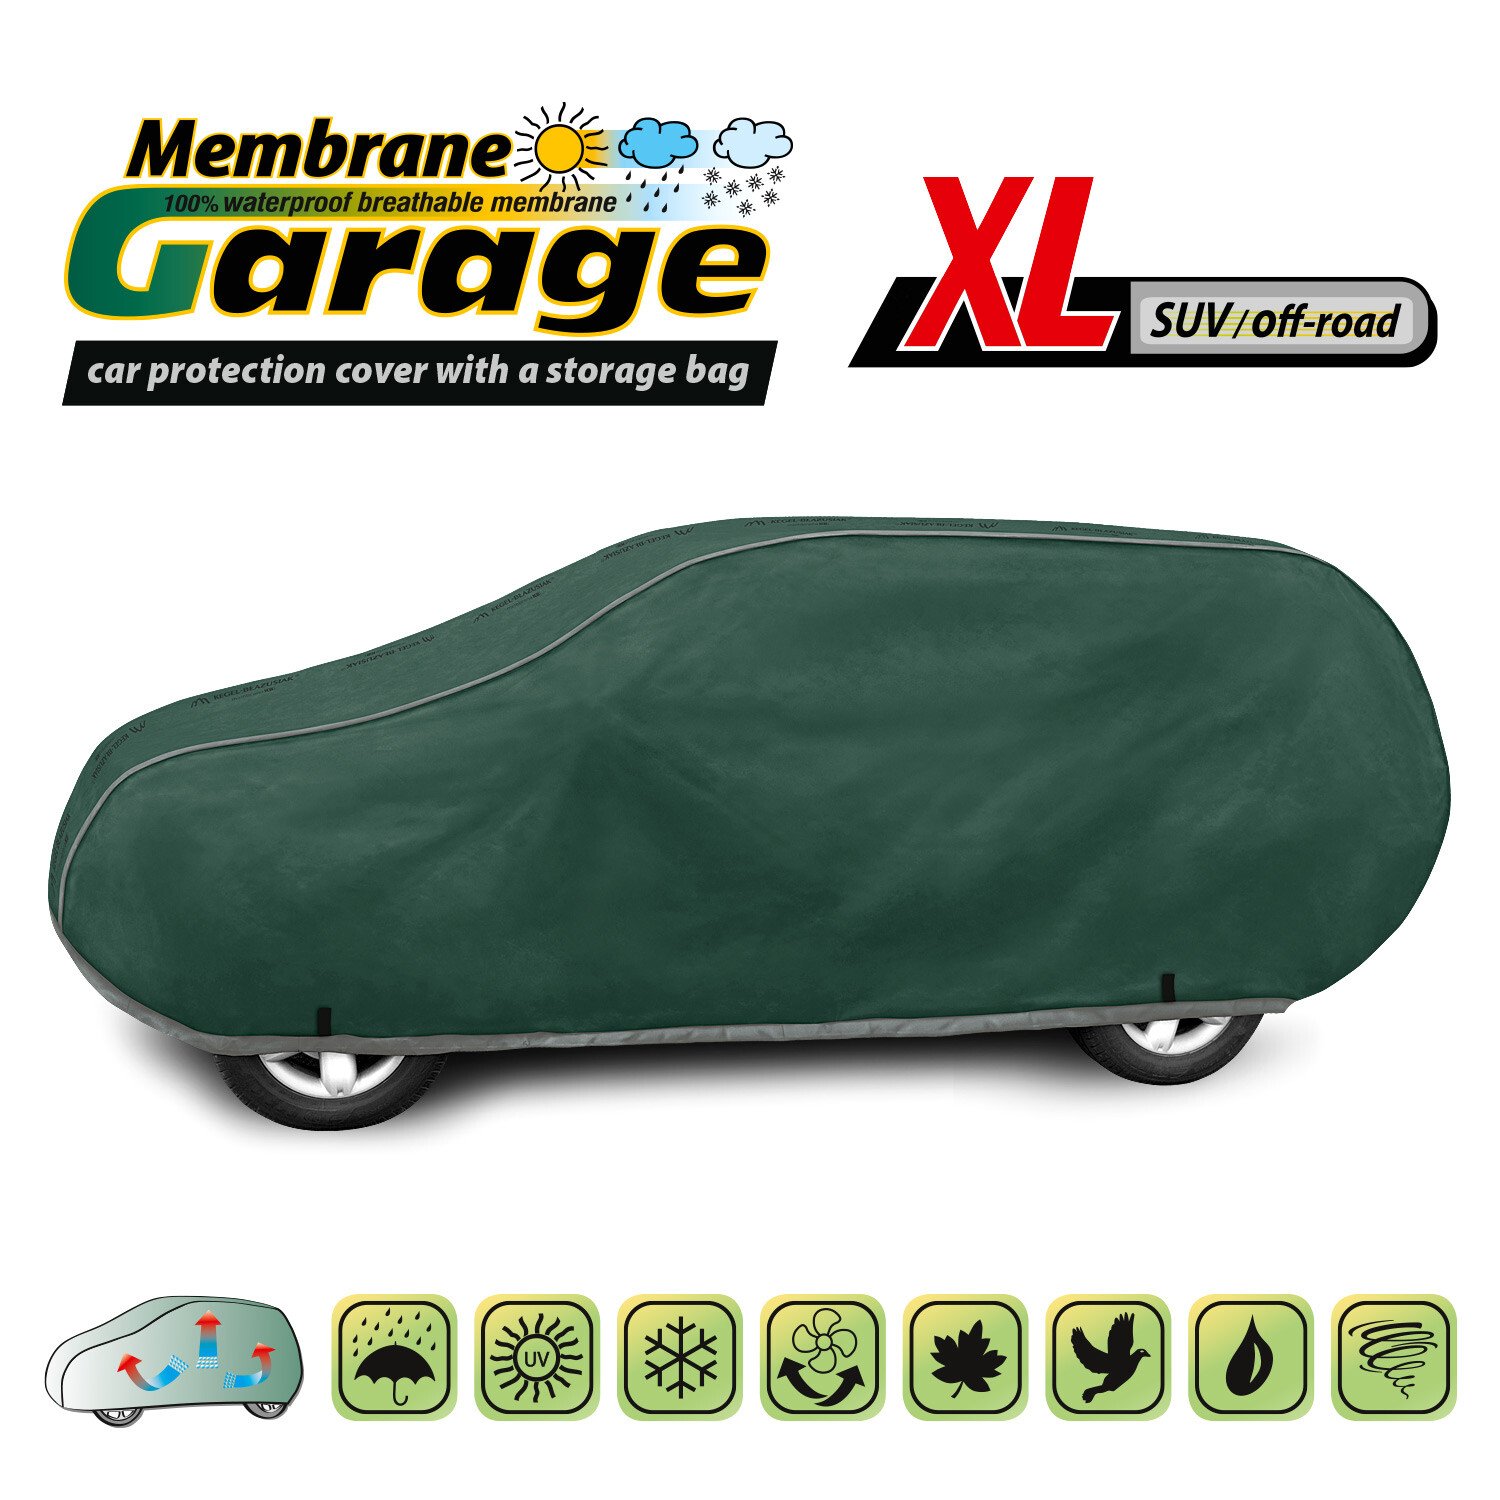 Membrane Garage full car cover, completely waterproof and breathable - XL - SUV/Off-Road thumb